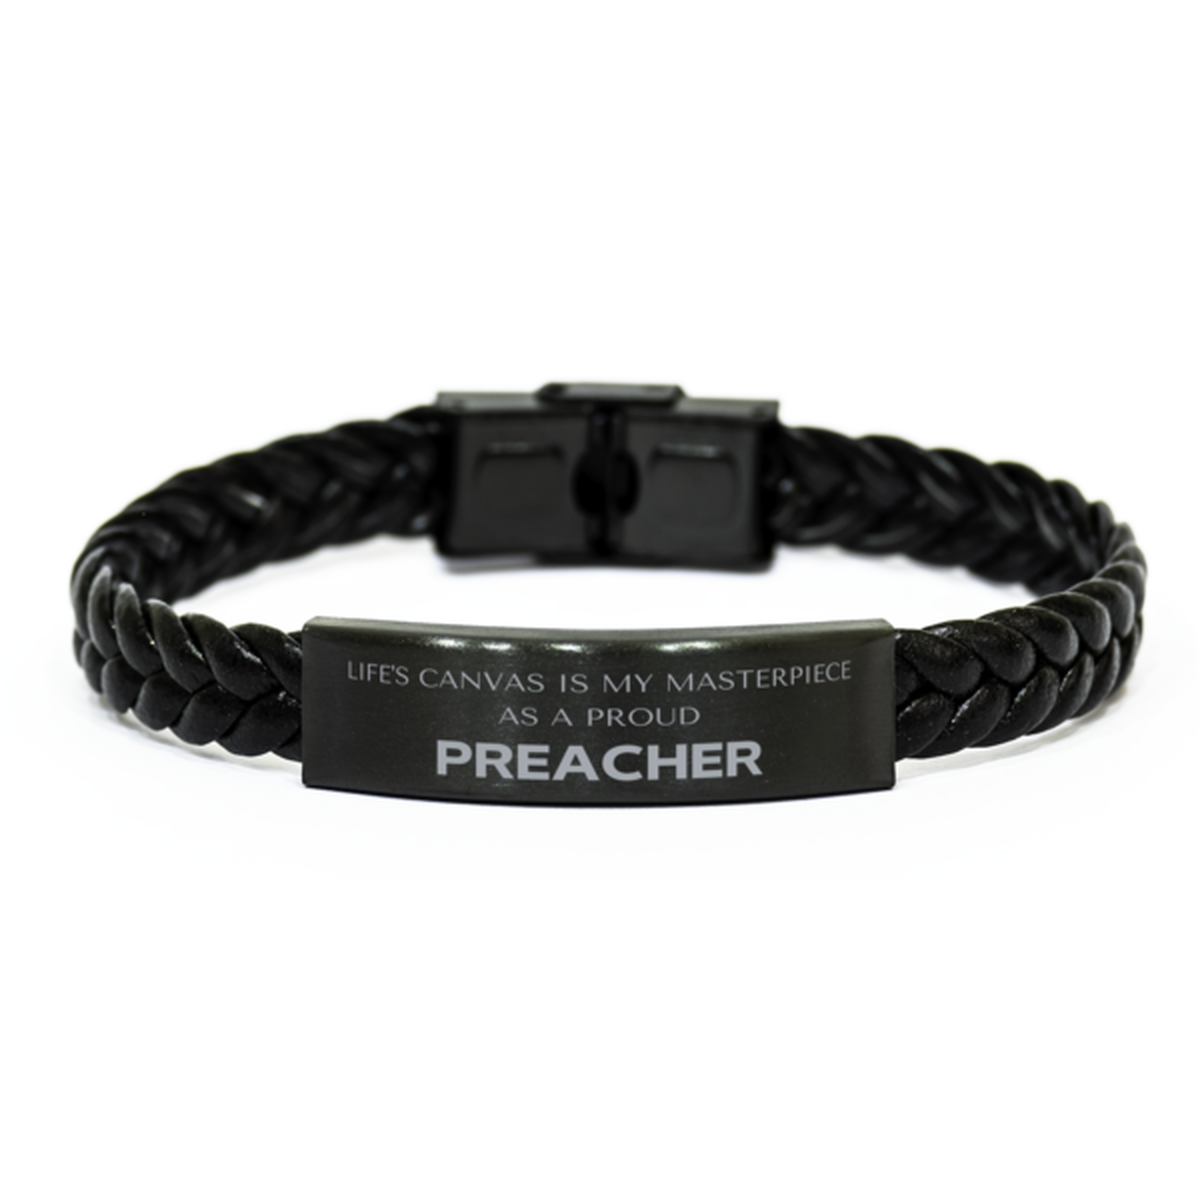 Proud Preacher Gifts, Life's canvas is my masterpiece, Epic Birthday Christmas Unique Braided Leather Bracelet For Preacher, Coworkers, Men, Women, Friends